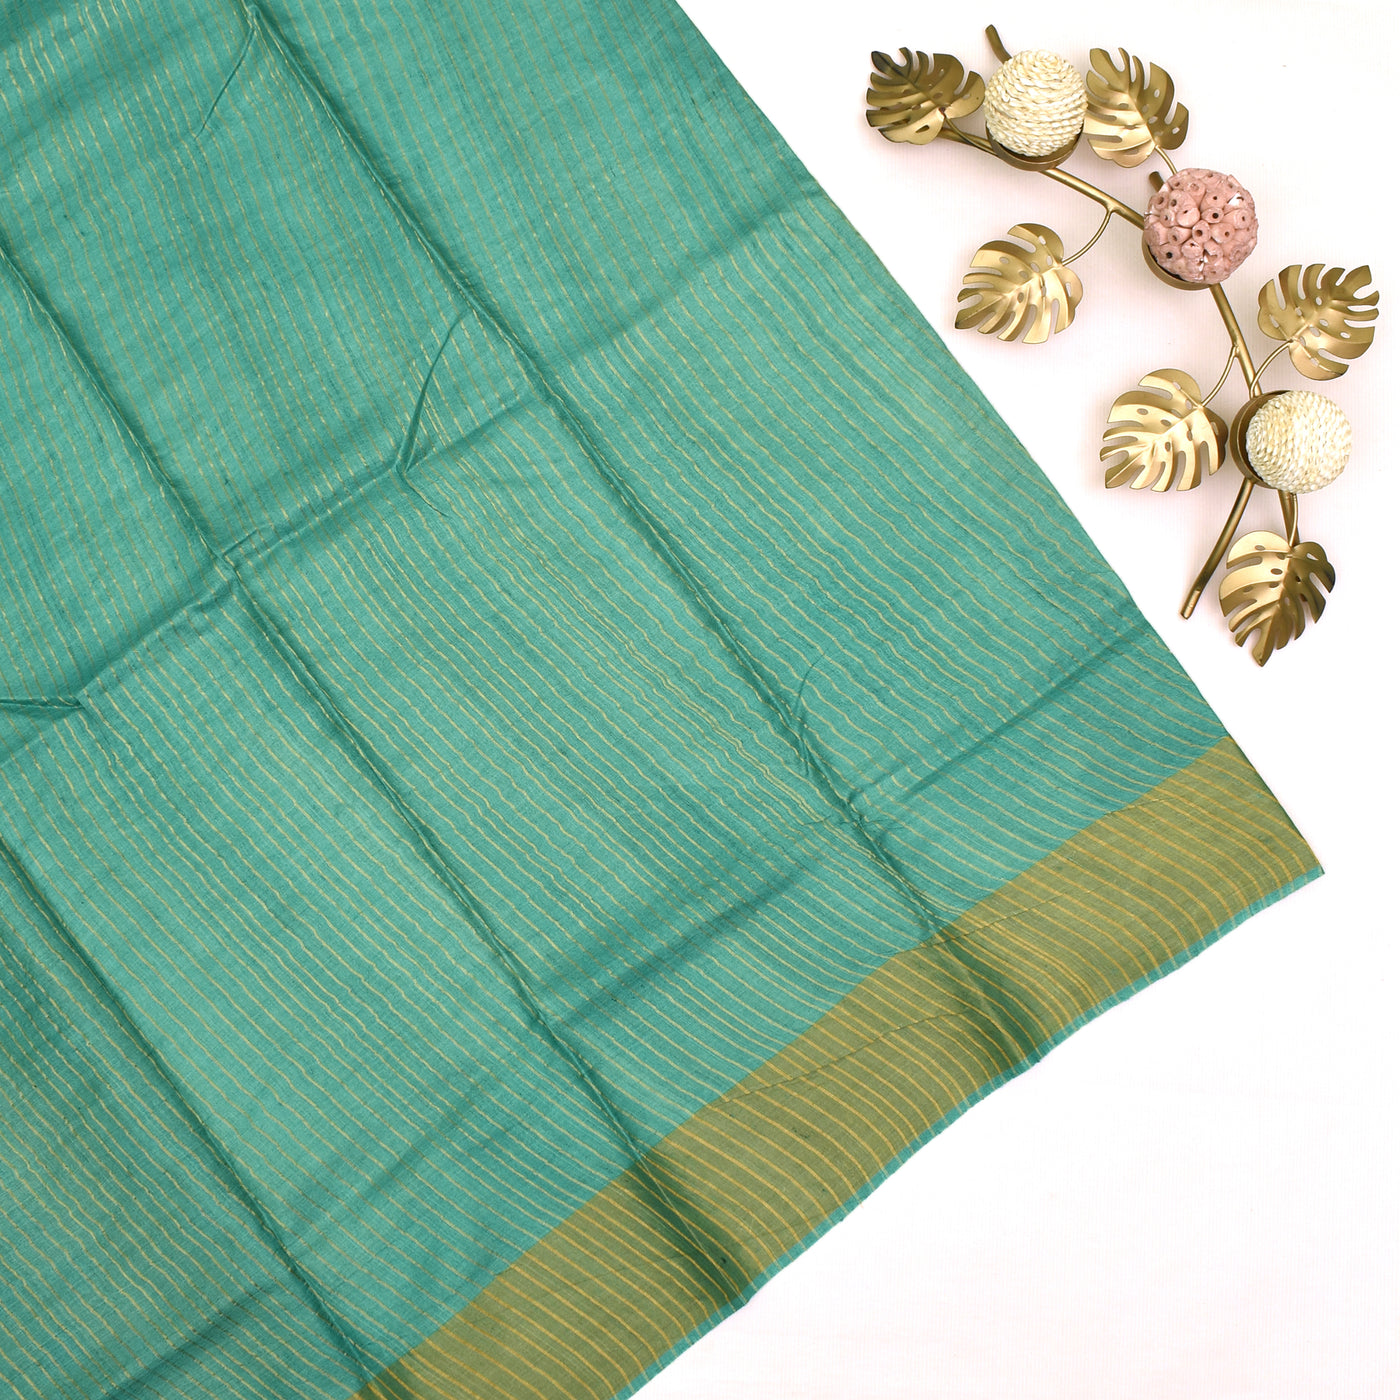 Tussar Printed Saree with turquoise blue blouse 